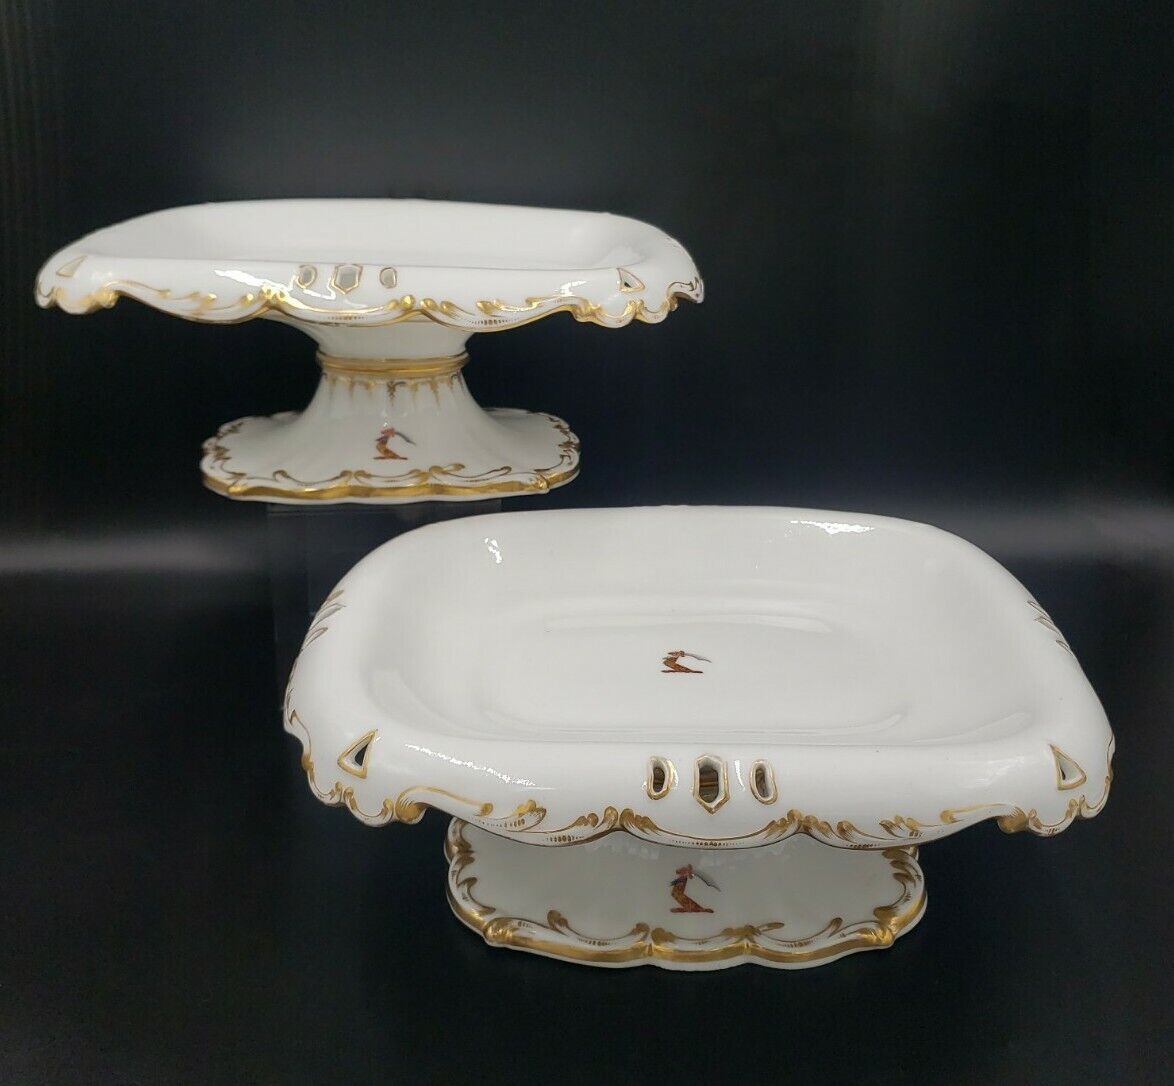 S/2 19th Century French White & Gold Porcelain Compotes w/ Family Crest